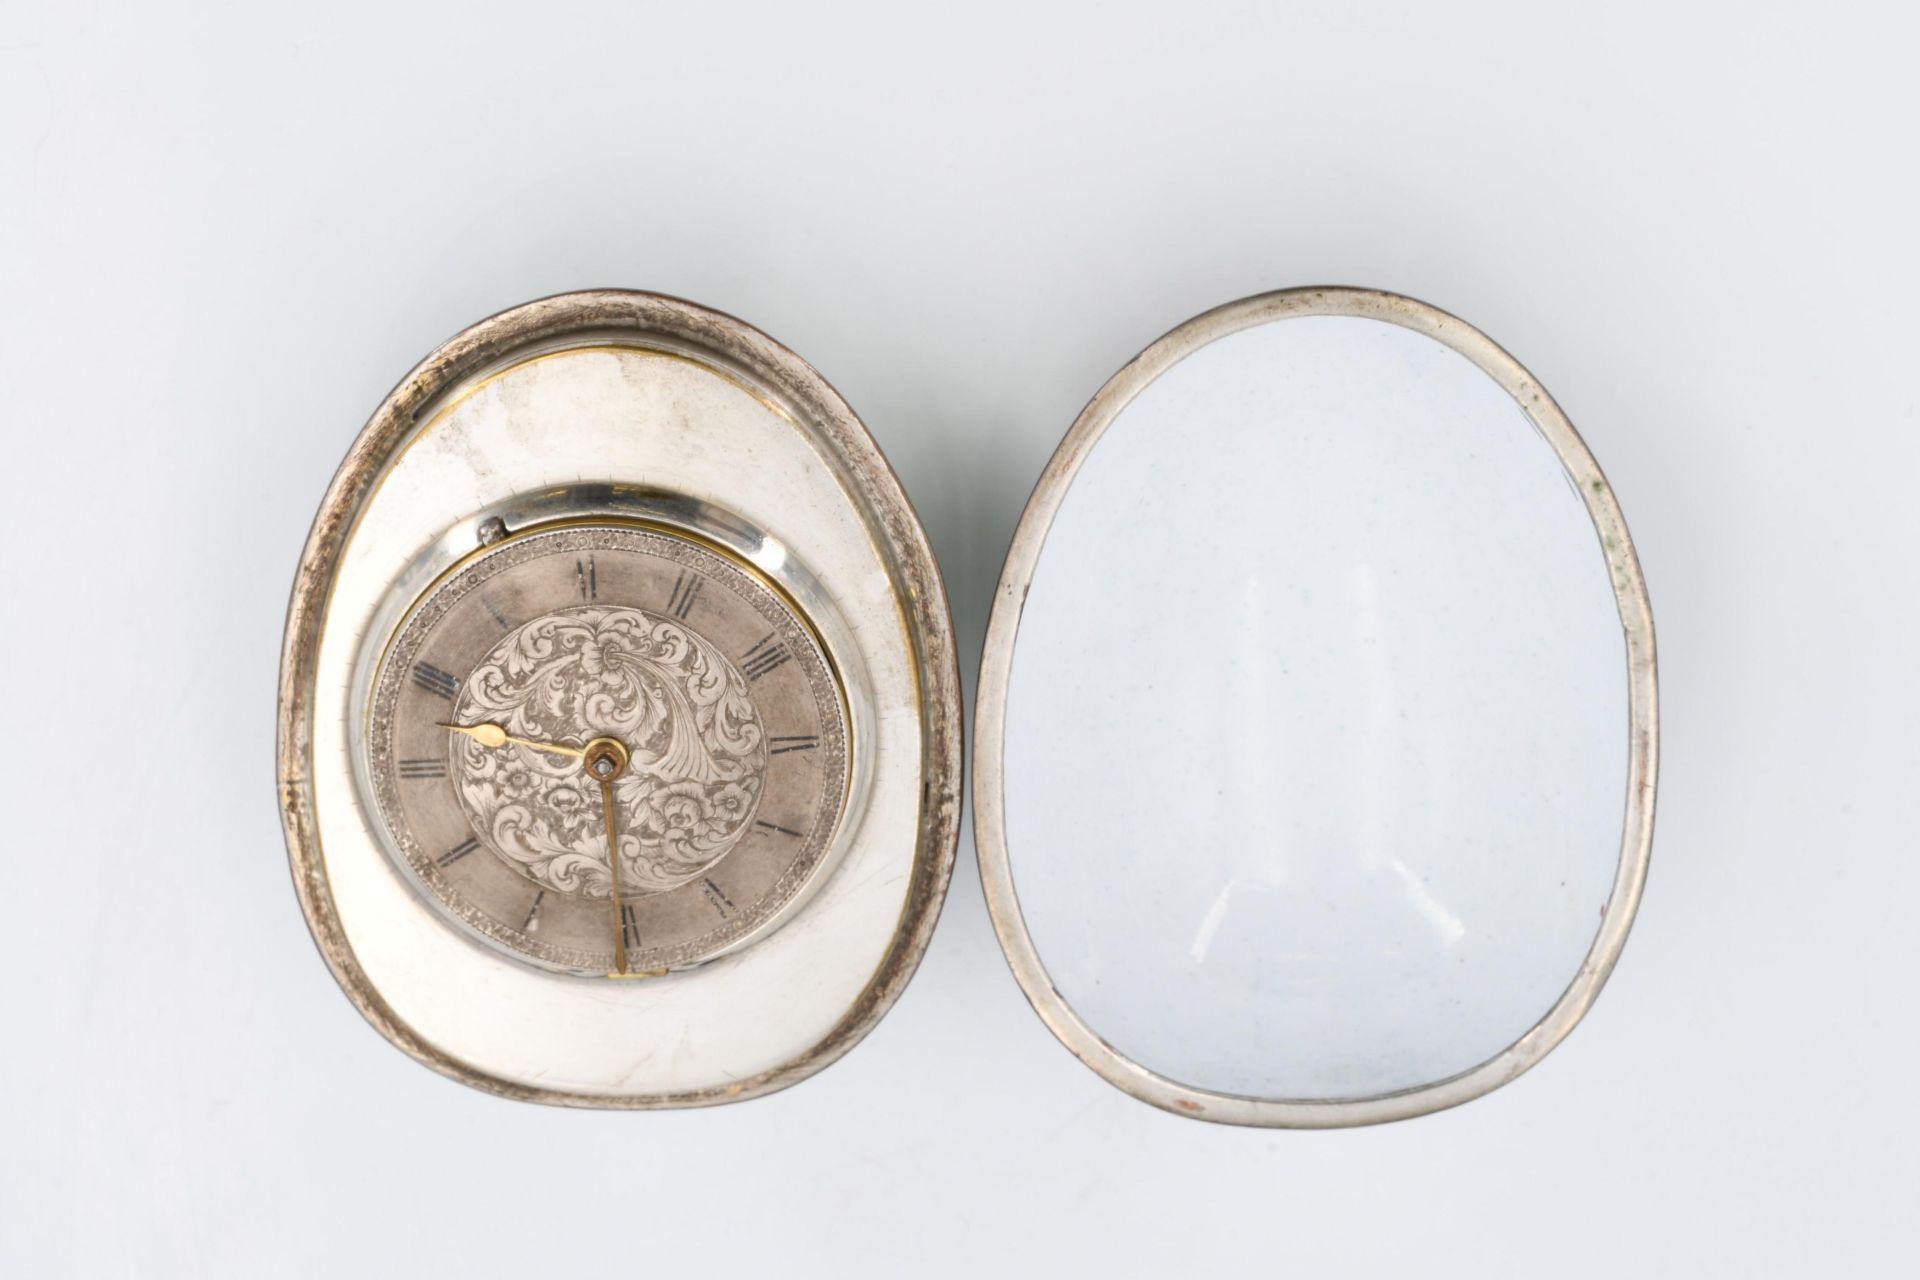 Small table clock in egg-shaped case with amoretto - Image 7 of 8